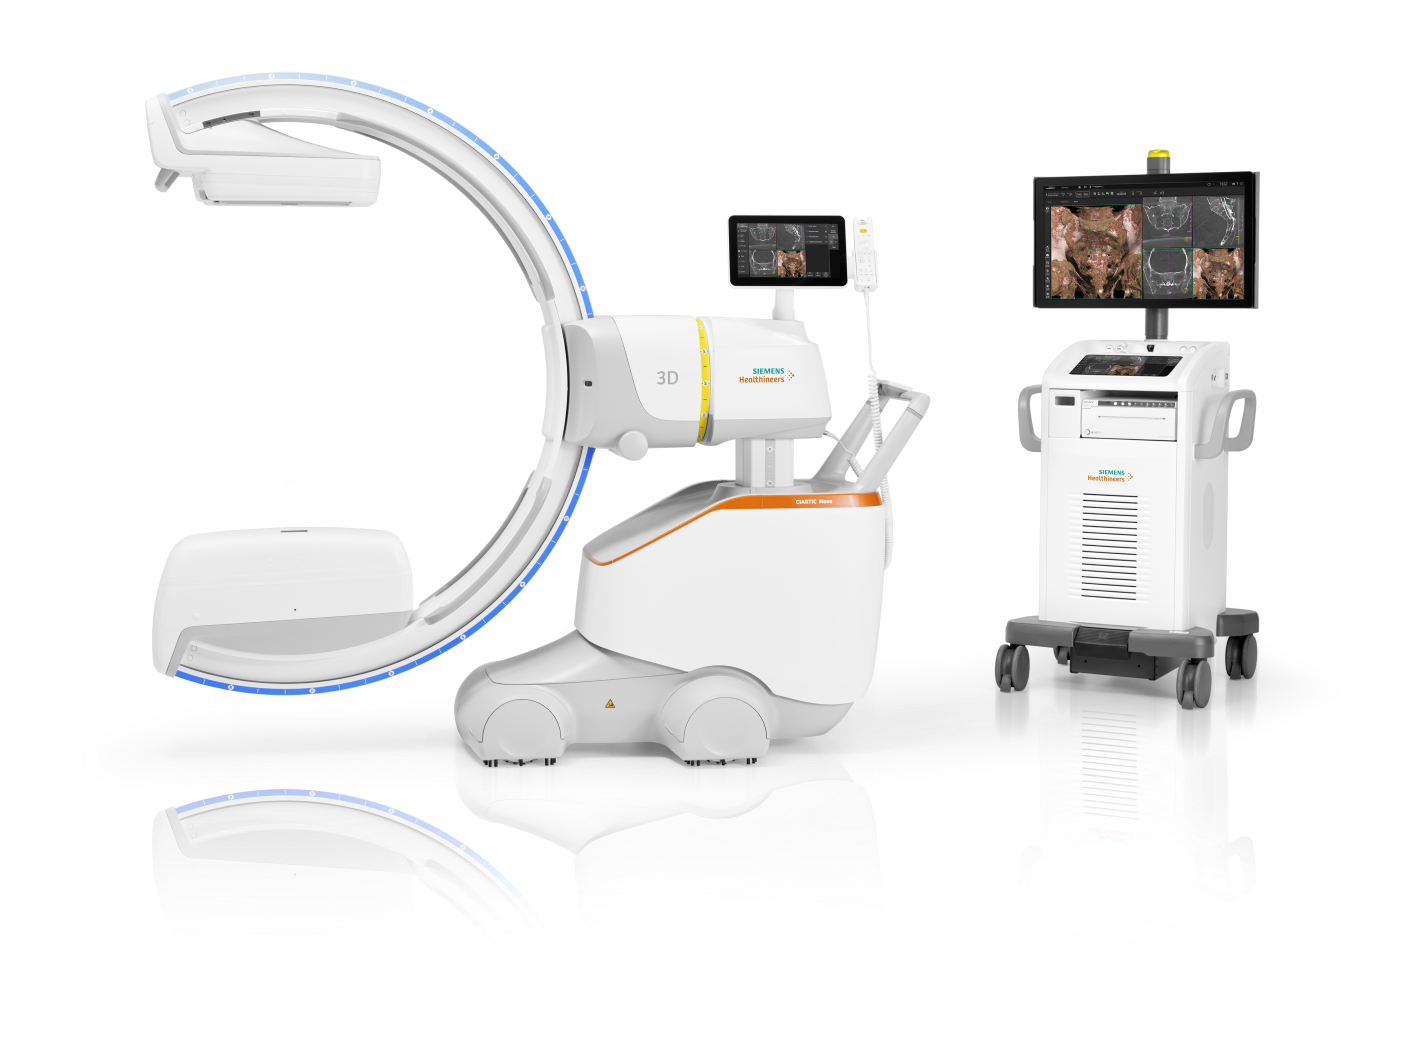 siemens-healthineers_AT_mobile-C-arm-machine_CIARTIC-Move_4-3